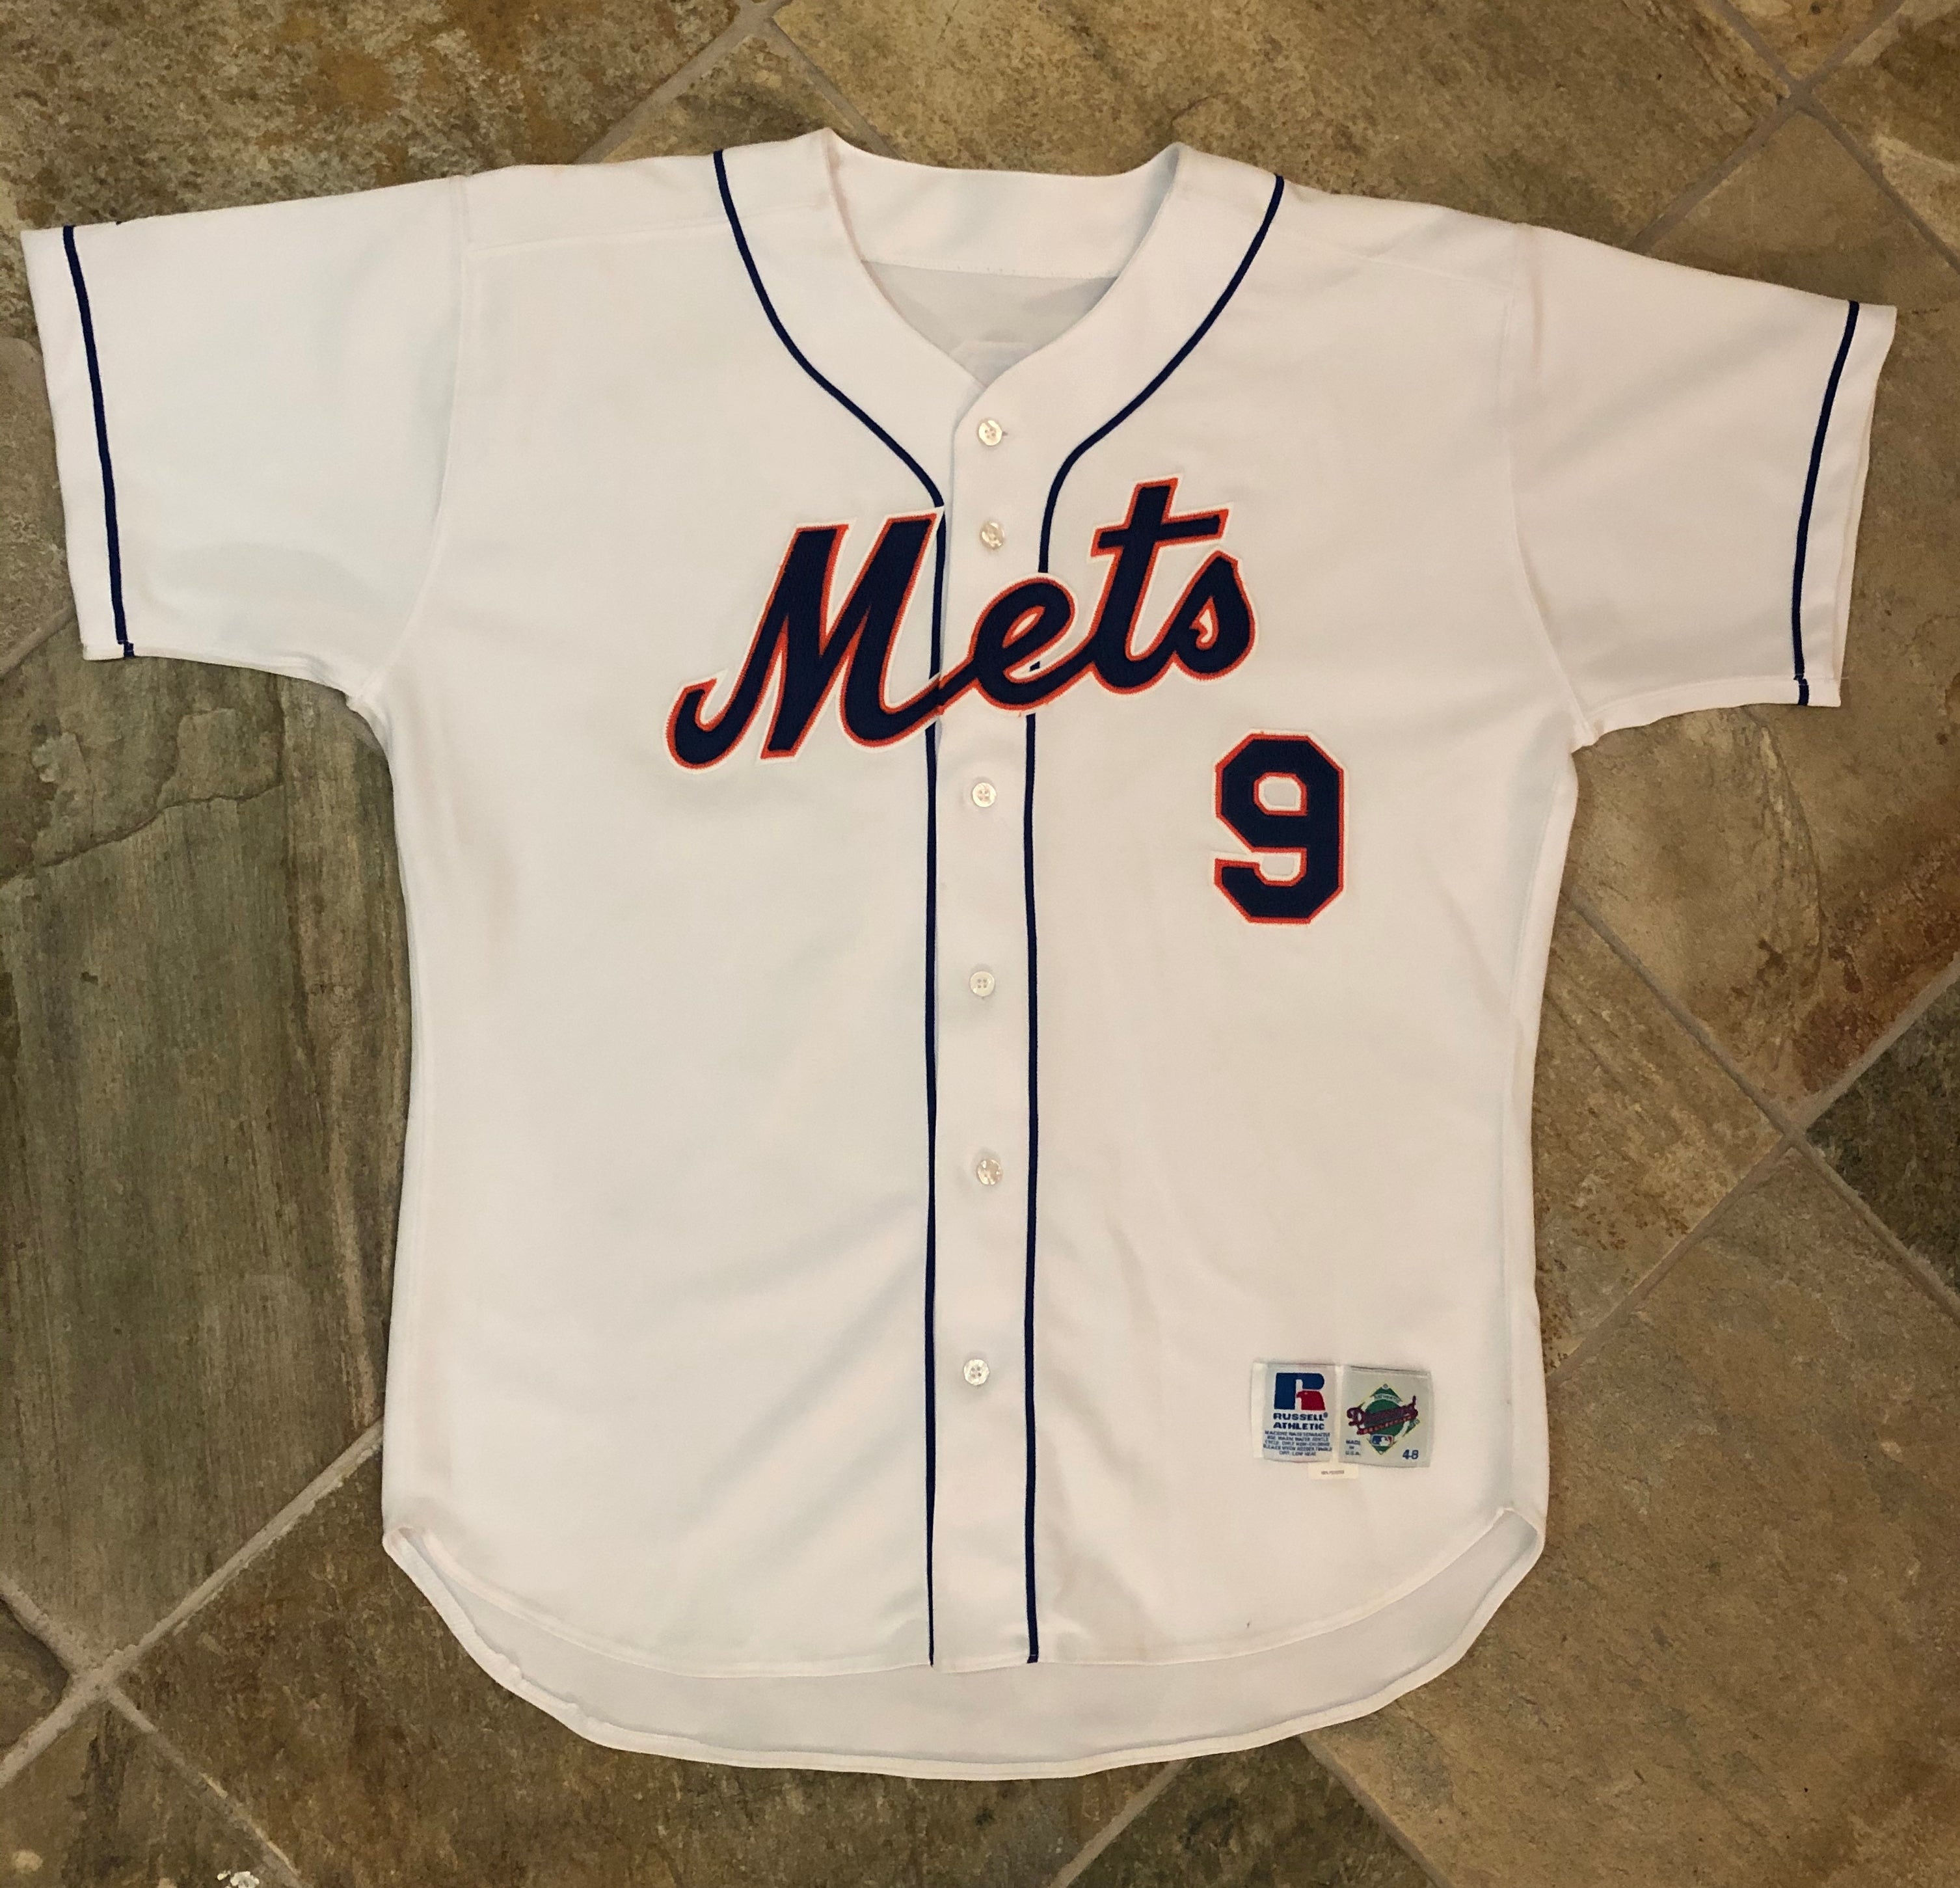 Today's vintage mail day! 1995-96 Todd Hundley Mets road jersey